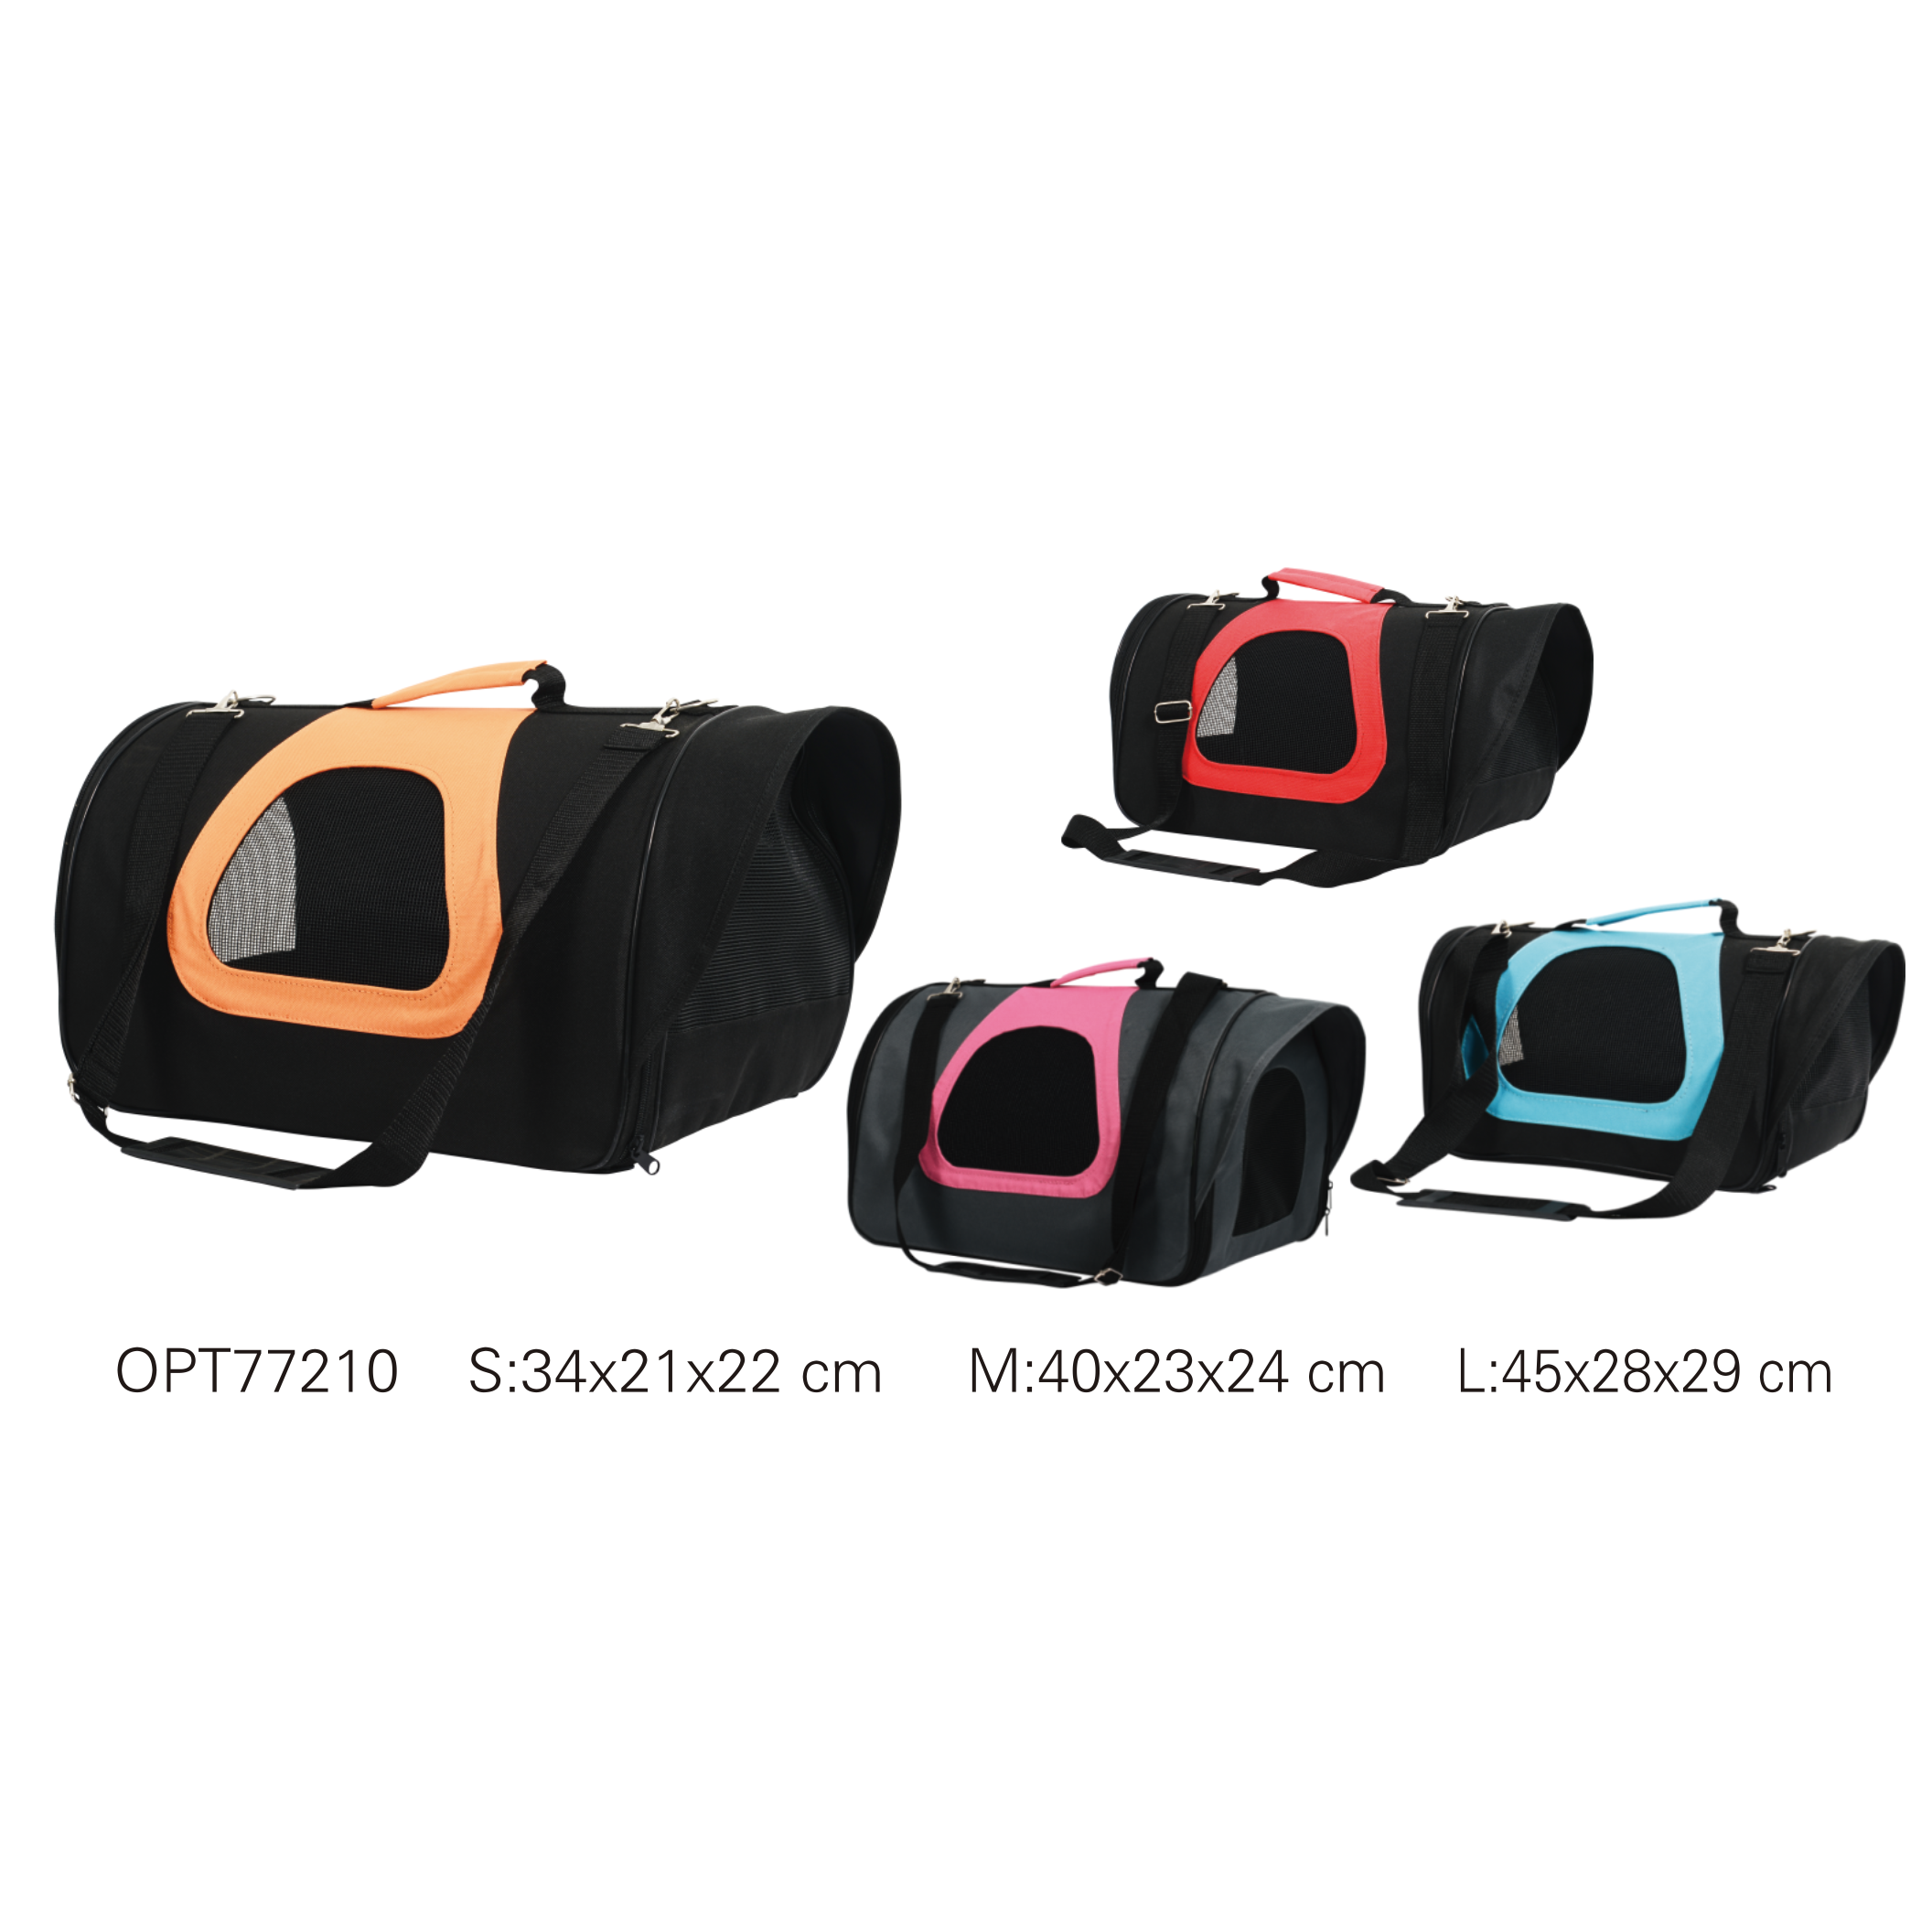 OPT77210 Pet bags & carriers